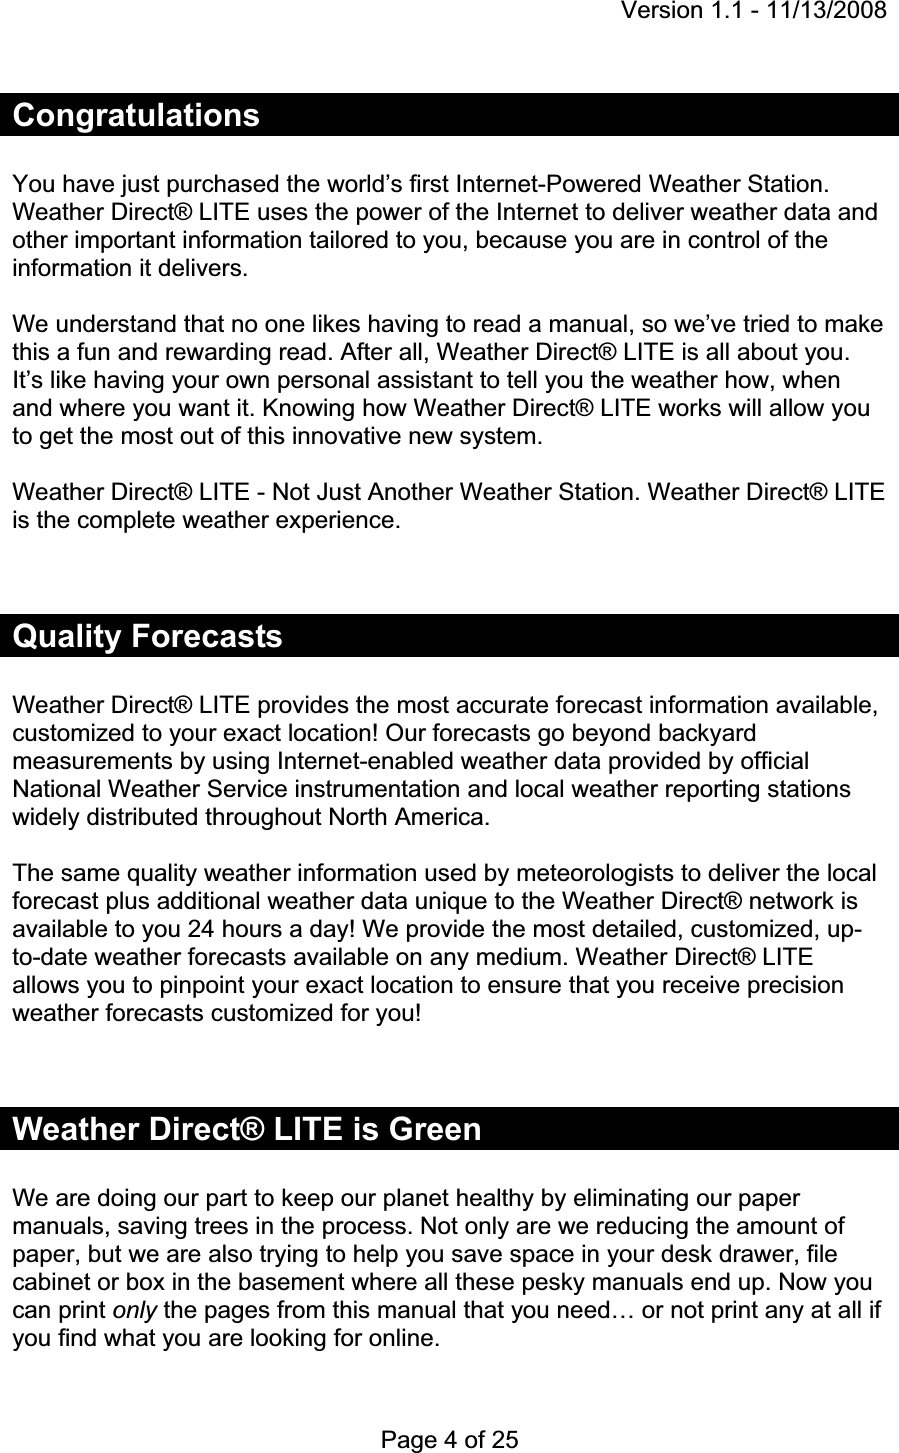 Version 1.1 - 11/13/2008 Page 4 of 25 CongratulationsYou have just purchased the world’s first Internet-Powered Weather Station. Weather Direct® LITE uses the power of the Internet to deliver weather data and other important information tailored to you, because you are in control of the information it delivers. We understand that no one likes having to read a manual, so we’ve tried to make this a fun and rewarding read. After all, Weather Direct® LITE is all about you. It’s like having your own personal assistant to tell you the weather how, when and where you want it. Knowing how Weather Direct® LITE works will allow you to get the most out of this innovative new system.Weather Direct® LITE - Not Just Another Weather Station. Weather Direct® LITE is the complete weather experience.  Quality Forecasts Weather Direct® LITE provides the most accurate forecast information available, customized to your exact location! Our forecasts go beyond backyard measurements by using Internet-enabled weather data provided by official National Weather Service instrumentation and local weather reporting stations widely distributed throughout North America.  The same quality weather information used by meteorologists to deliver the local forecast plus additional weather data unique to the Weather Direct® network is available to you 24 hours a day! We provide the most detailed, customized, up-to-date weather forecasts available on any medium. Weather Direct® LITE allows you to pinpoint your exact location to ensure that you receive precision weather forecasts customized for you!Weather Direct® LITE is Green We are doing our part to keep our planet healthy by eliminating our paper manuals, saving trees in the process. Not only are we reducing the amount of paper, but we are also trying to help you save space in your desk drawer, file cabinet or box in the basement where all these pesky manuals end up. Now you can print only the pages from this manual that you need… or not print any at all if you find what you are looking for online. 